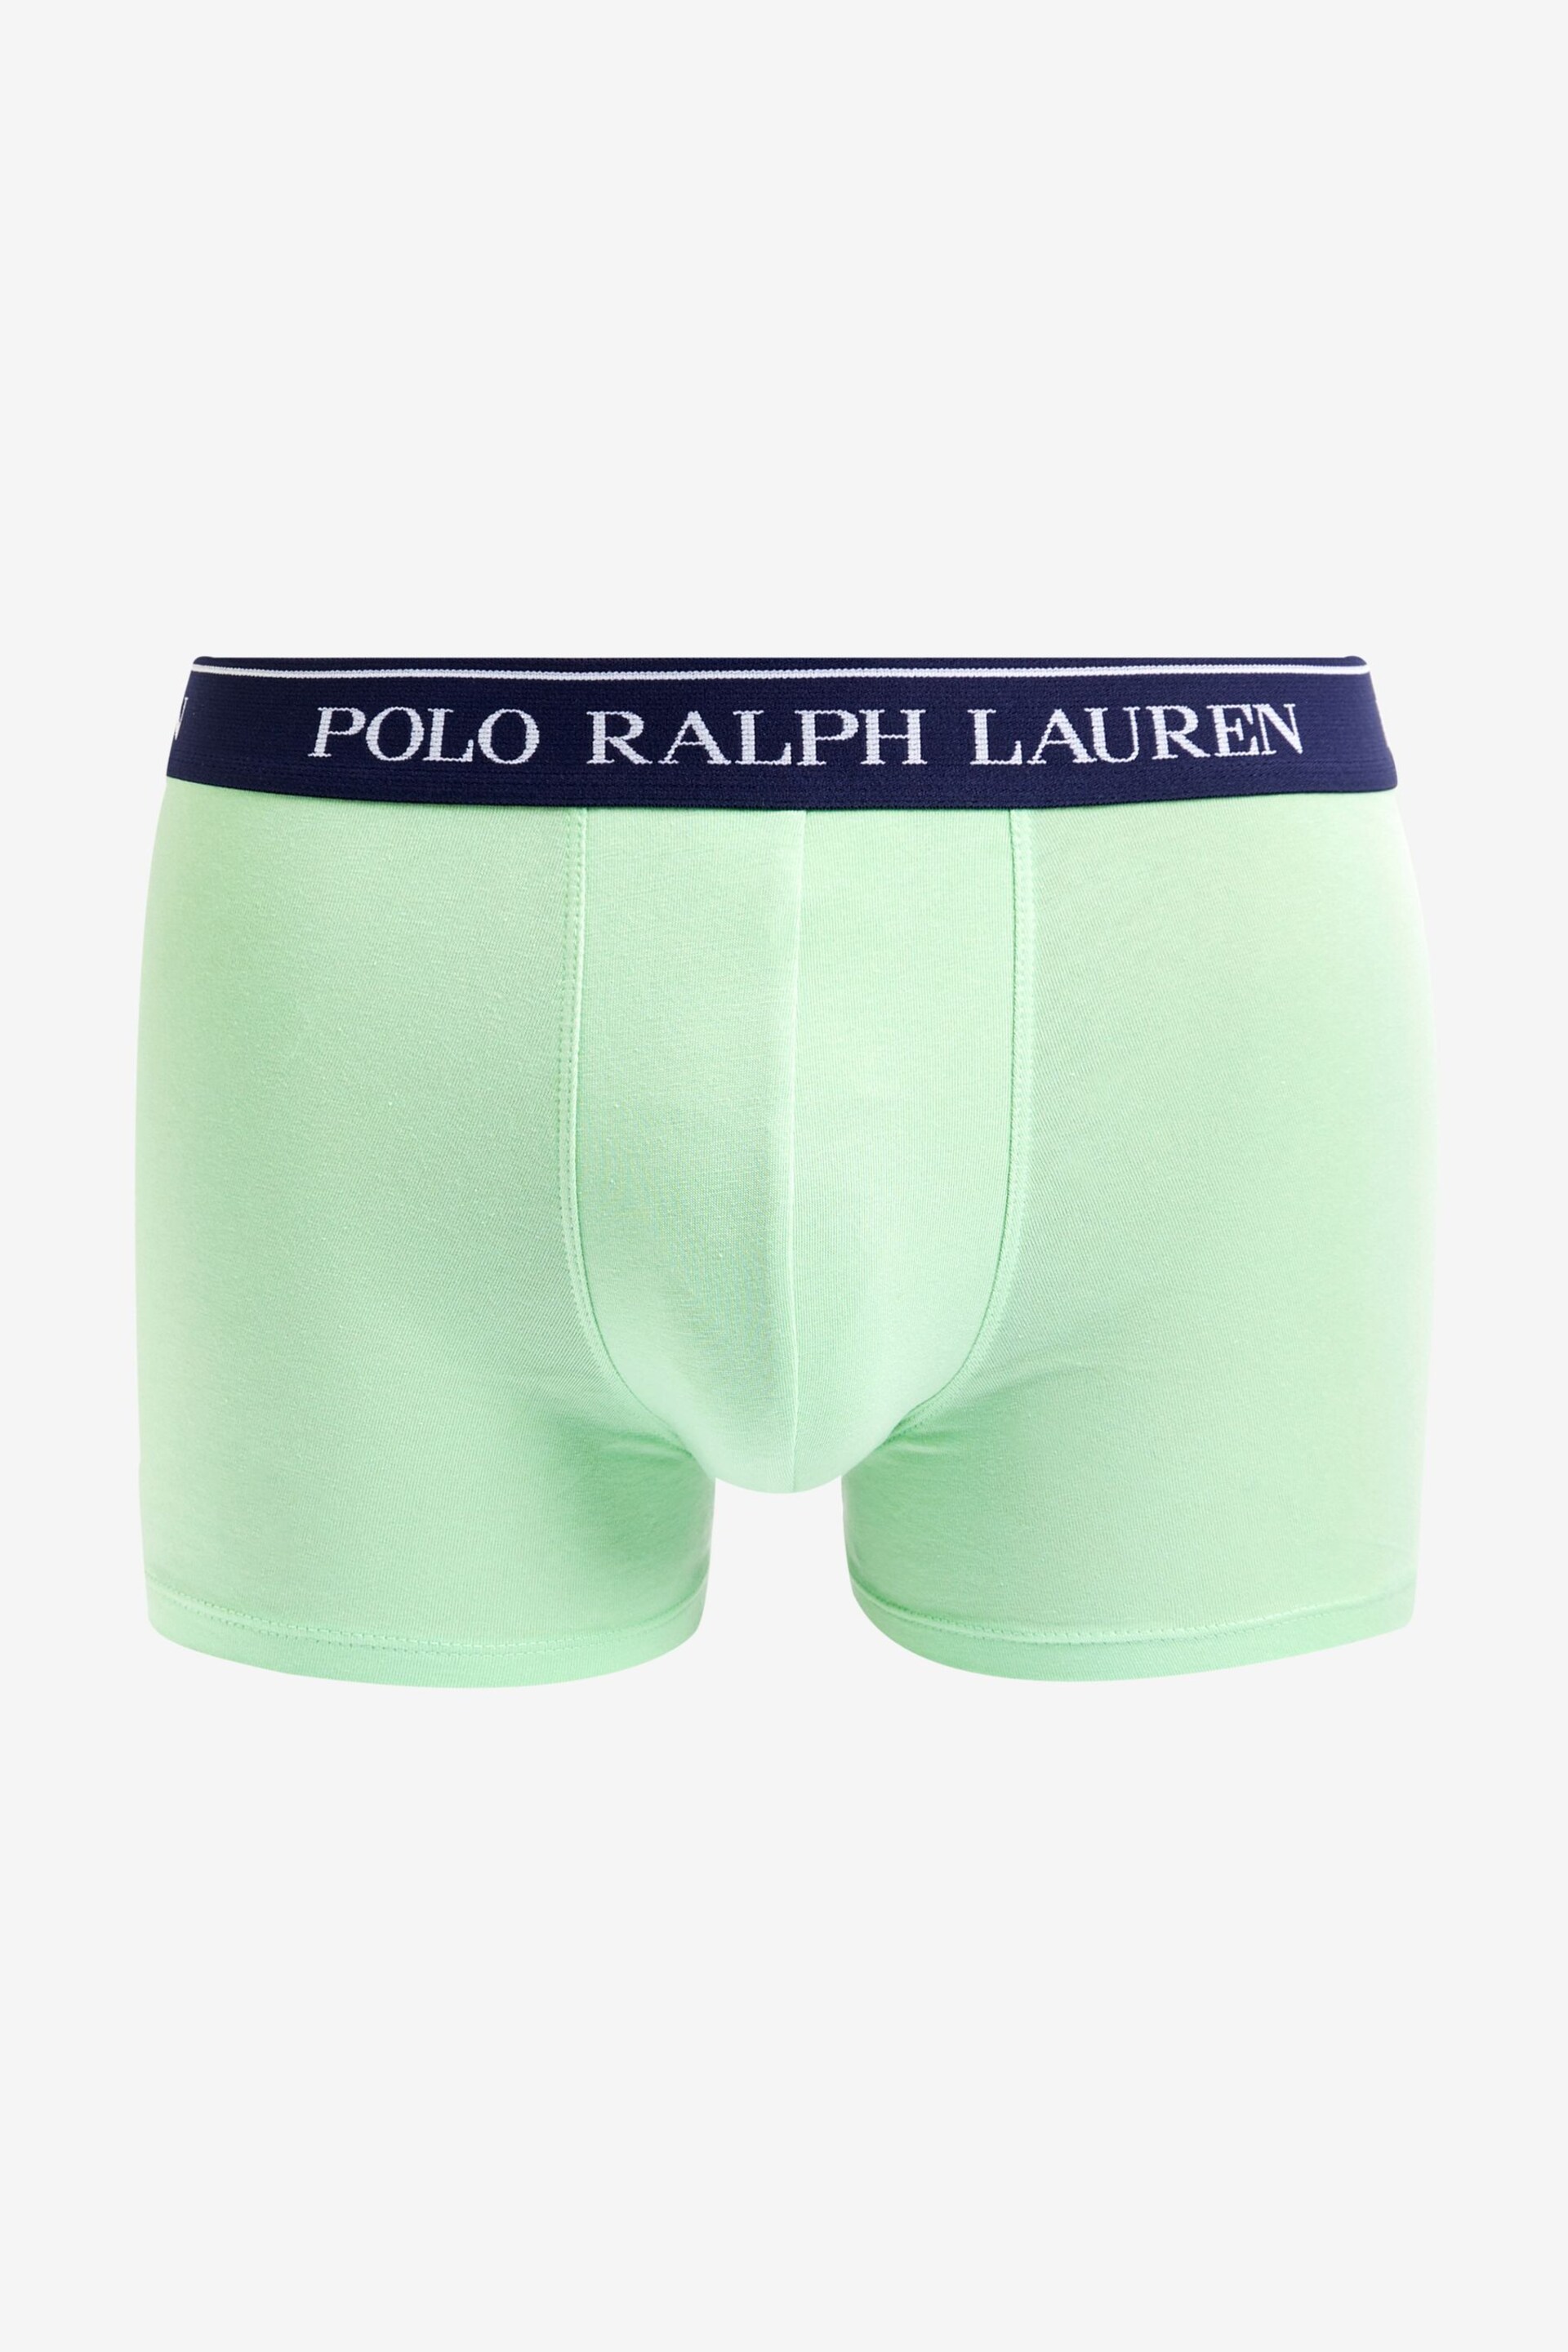 Polo Ralph Lauren Classic Stretch Cotton Boxers 5-Pack - Image 5 of 6